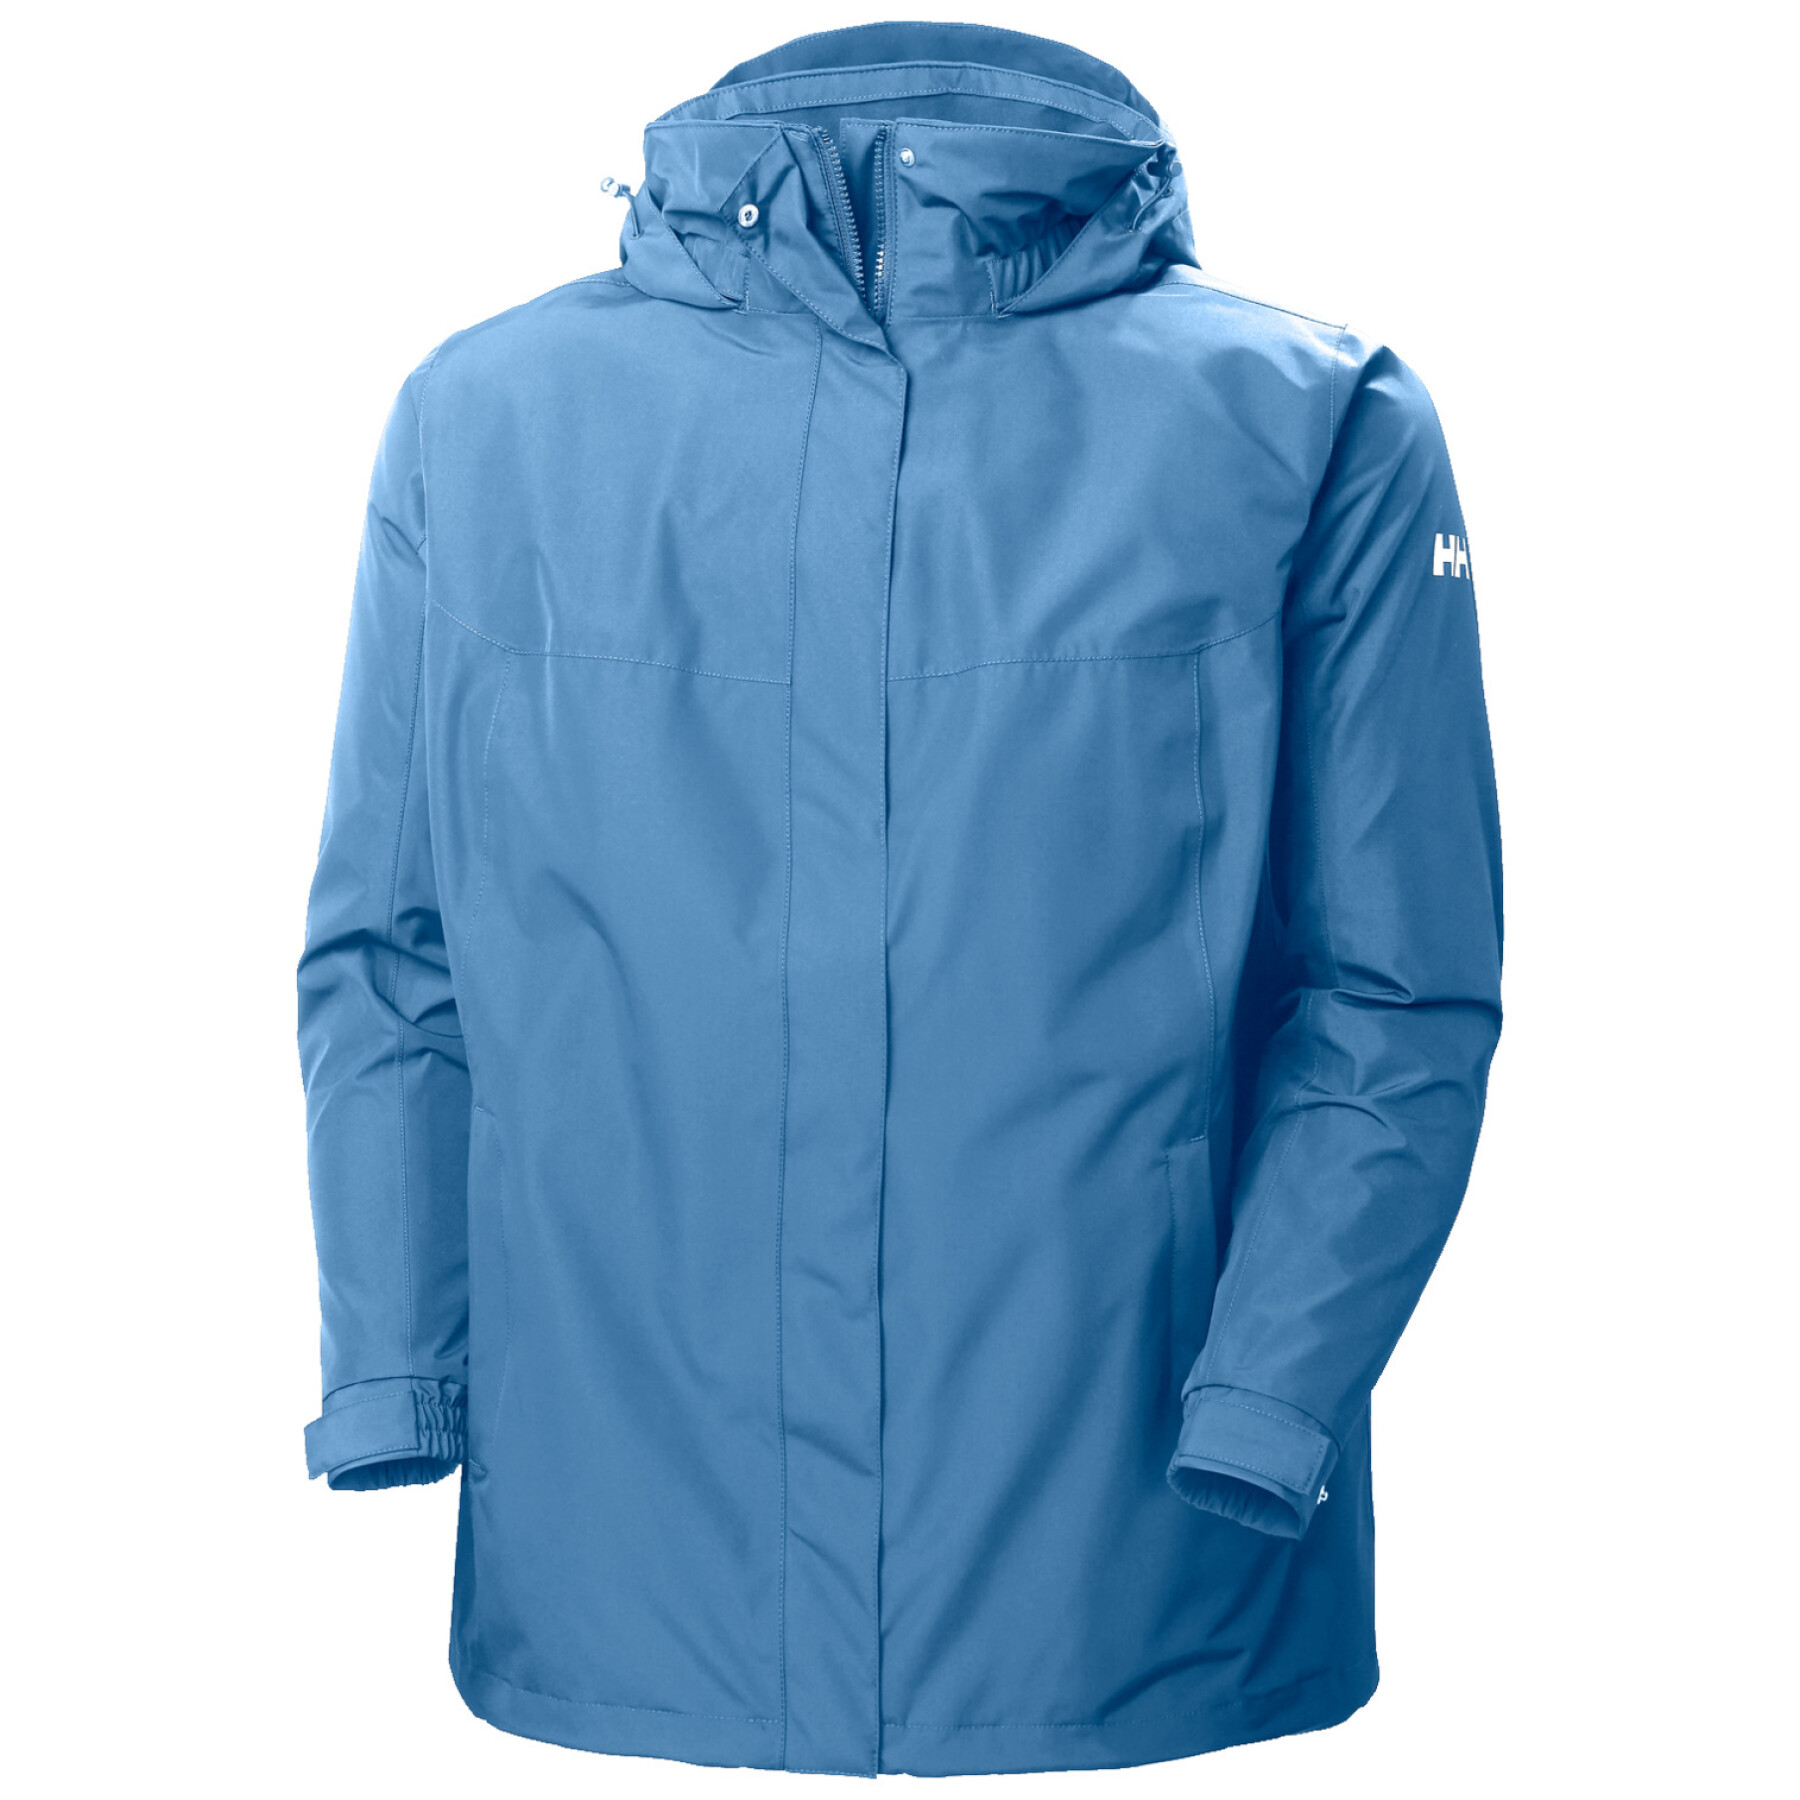 Chaqueta impermeable mujer Helly Hansen Aden plus